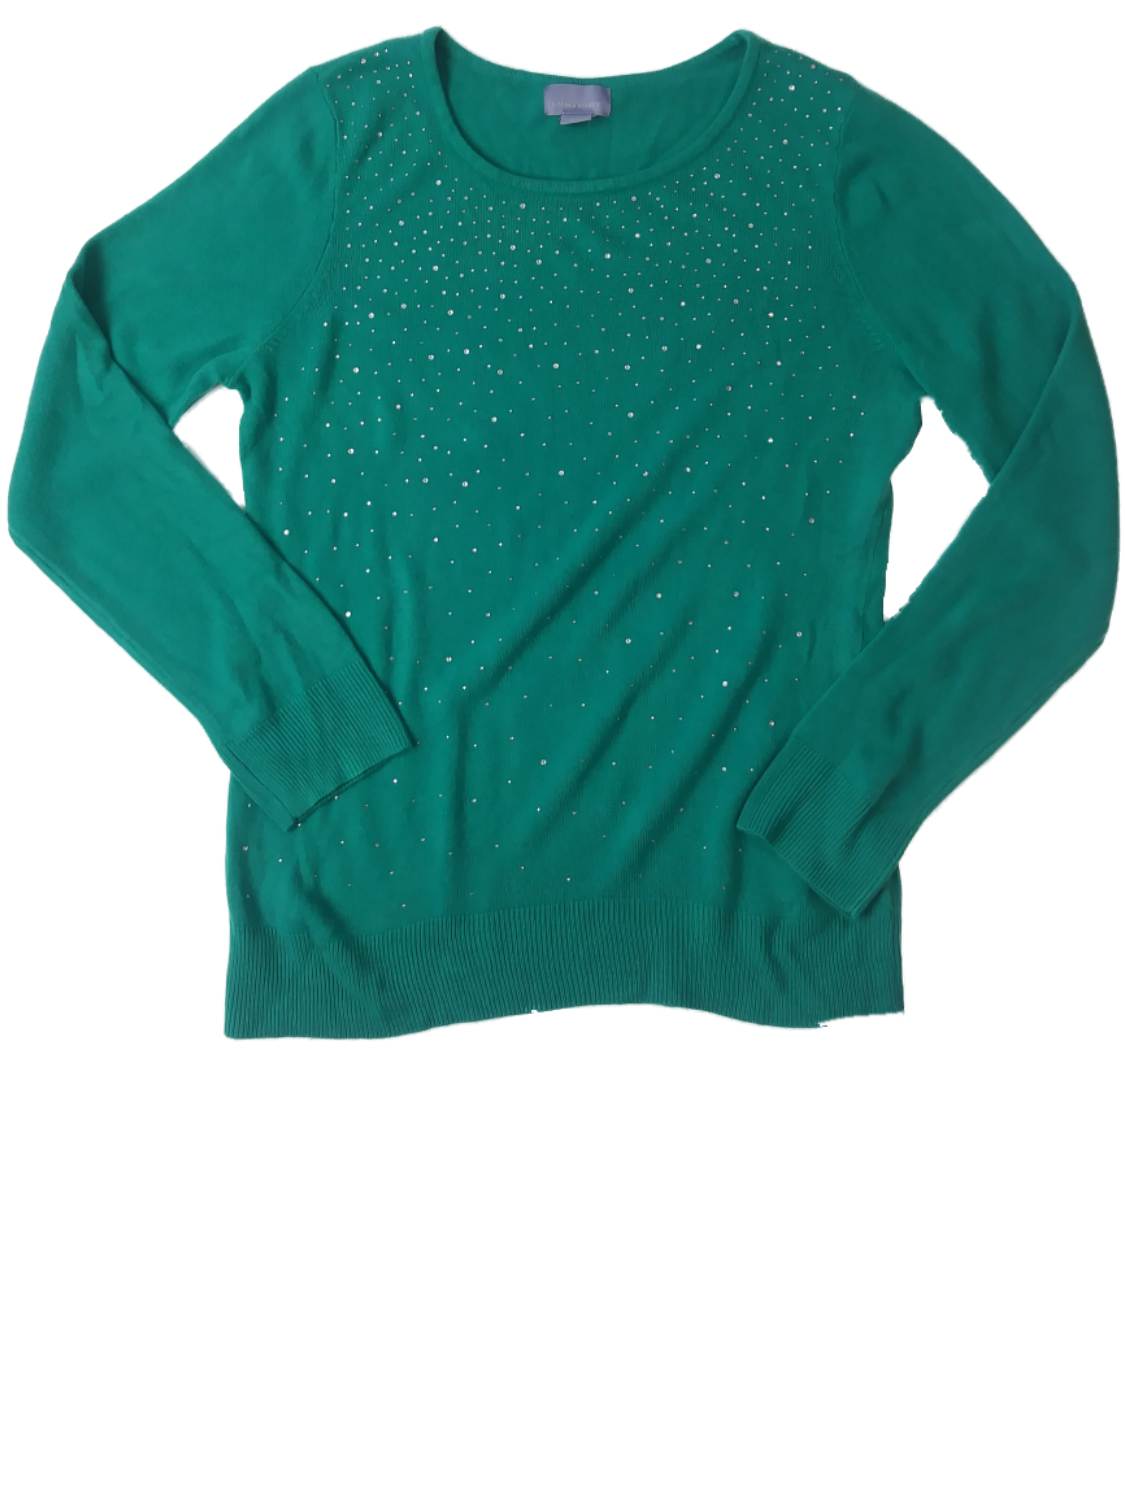 Laura Scott Womens Teal Green Knit Bedazzled Sweater Casual Dress Holiday Pullover